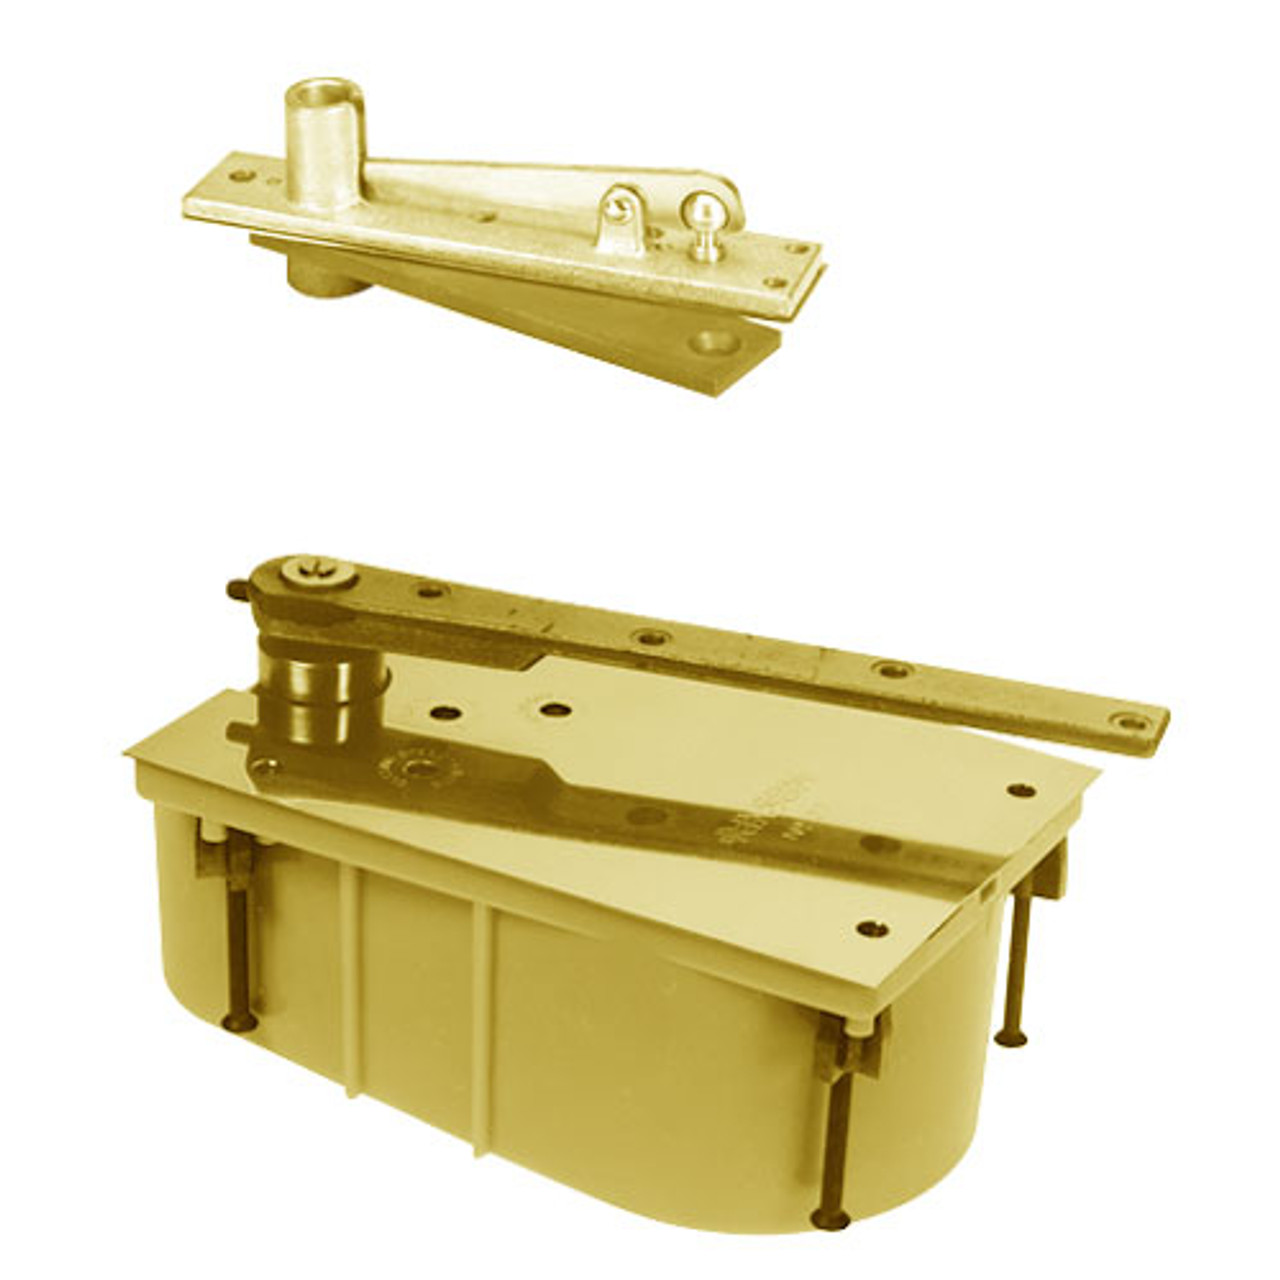 28-105N-554-LFP-CWF-LH-605 Rixson 28 Series Heavy Duty Single Acting Center Hung Floor Closer with Concealed Arm in Bright Brass Finish